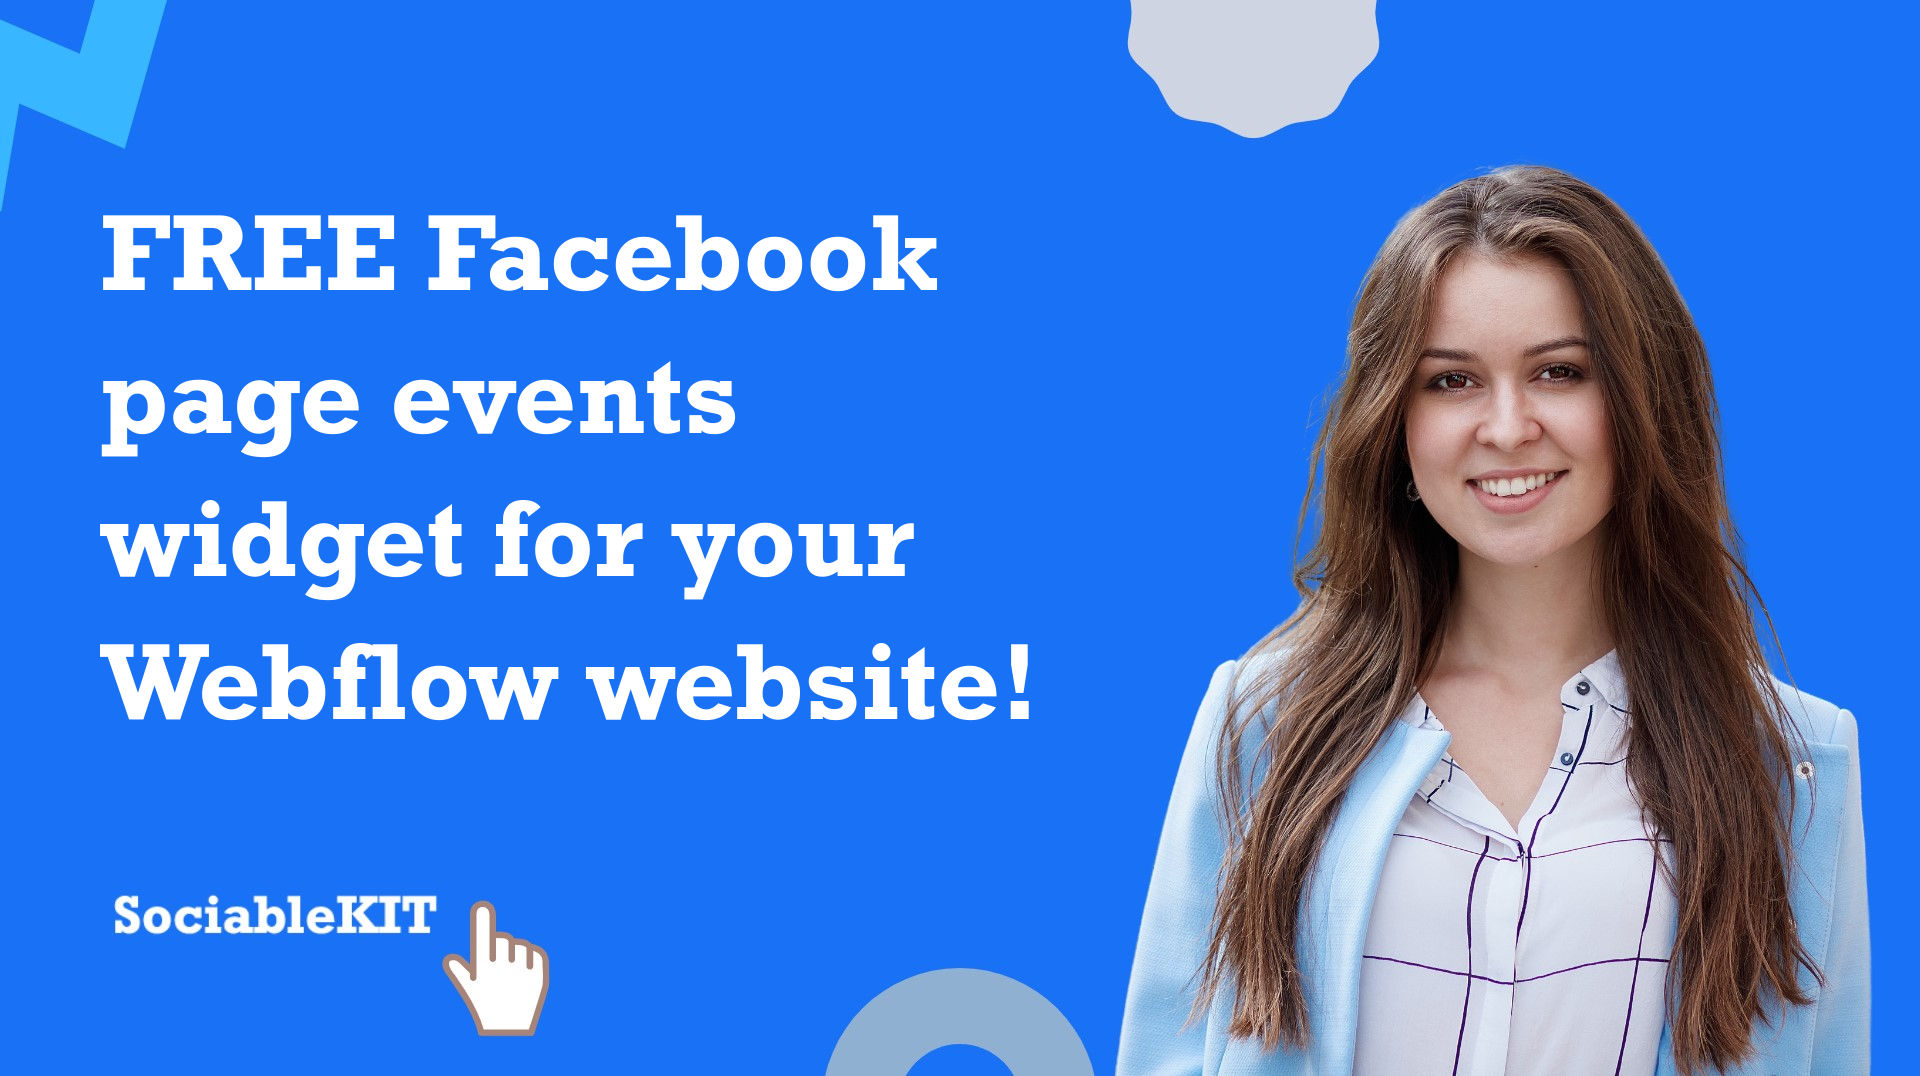 Free Facebook page events widget for your Webflow website